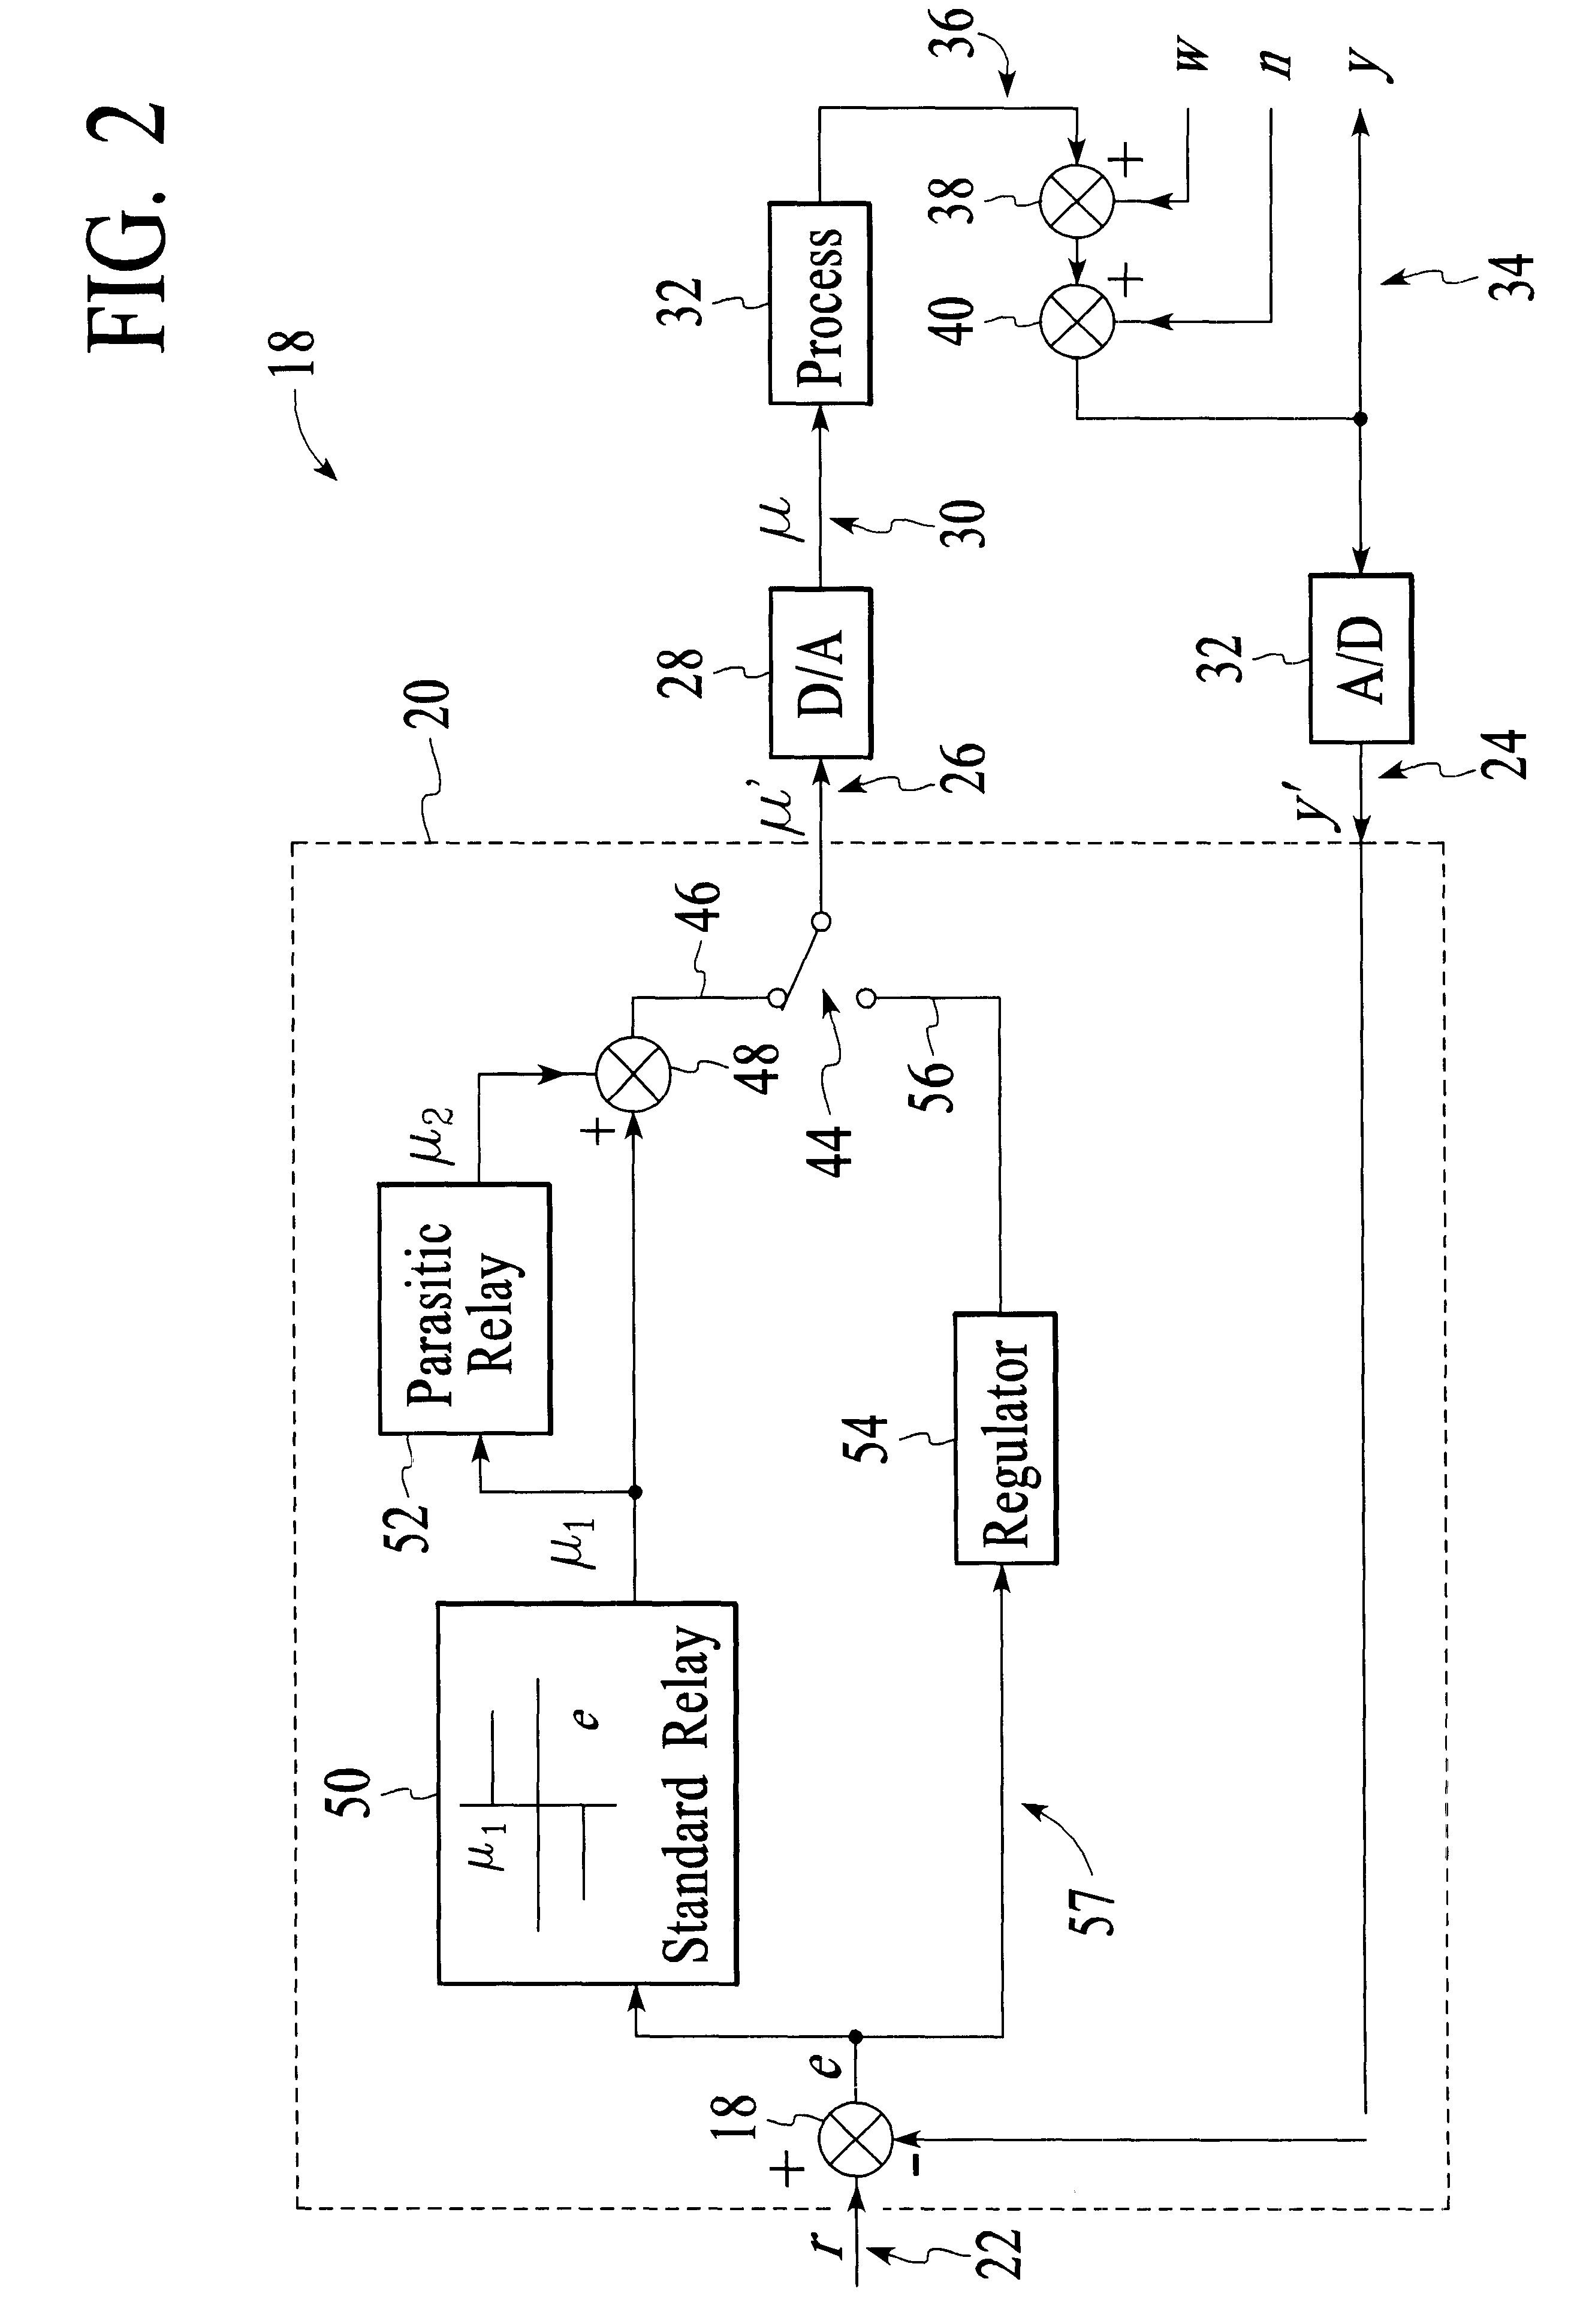 Apparatus for relay based multiple point process frequency response estimation and control tuning